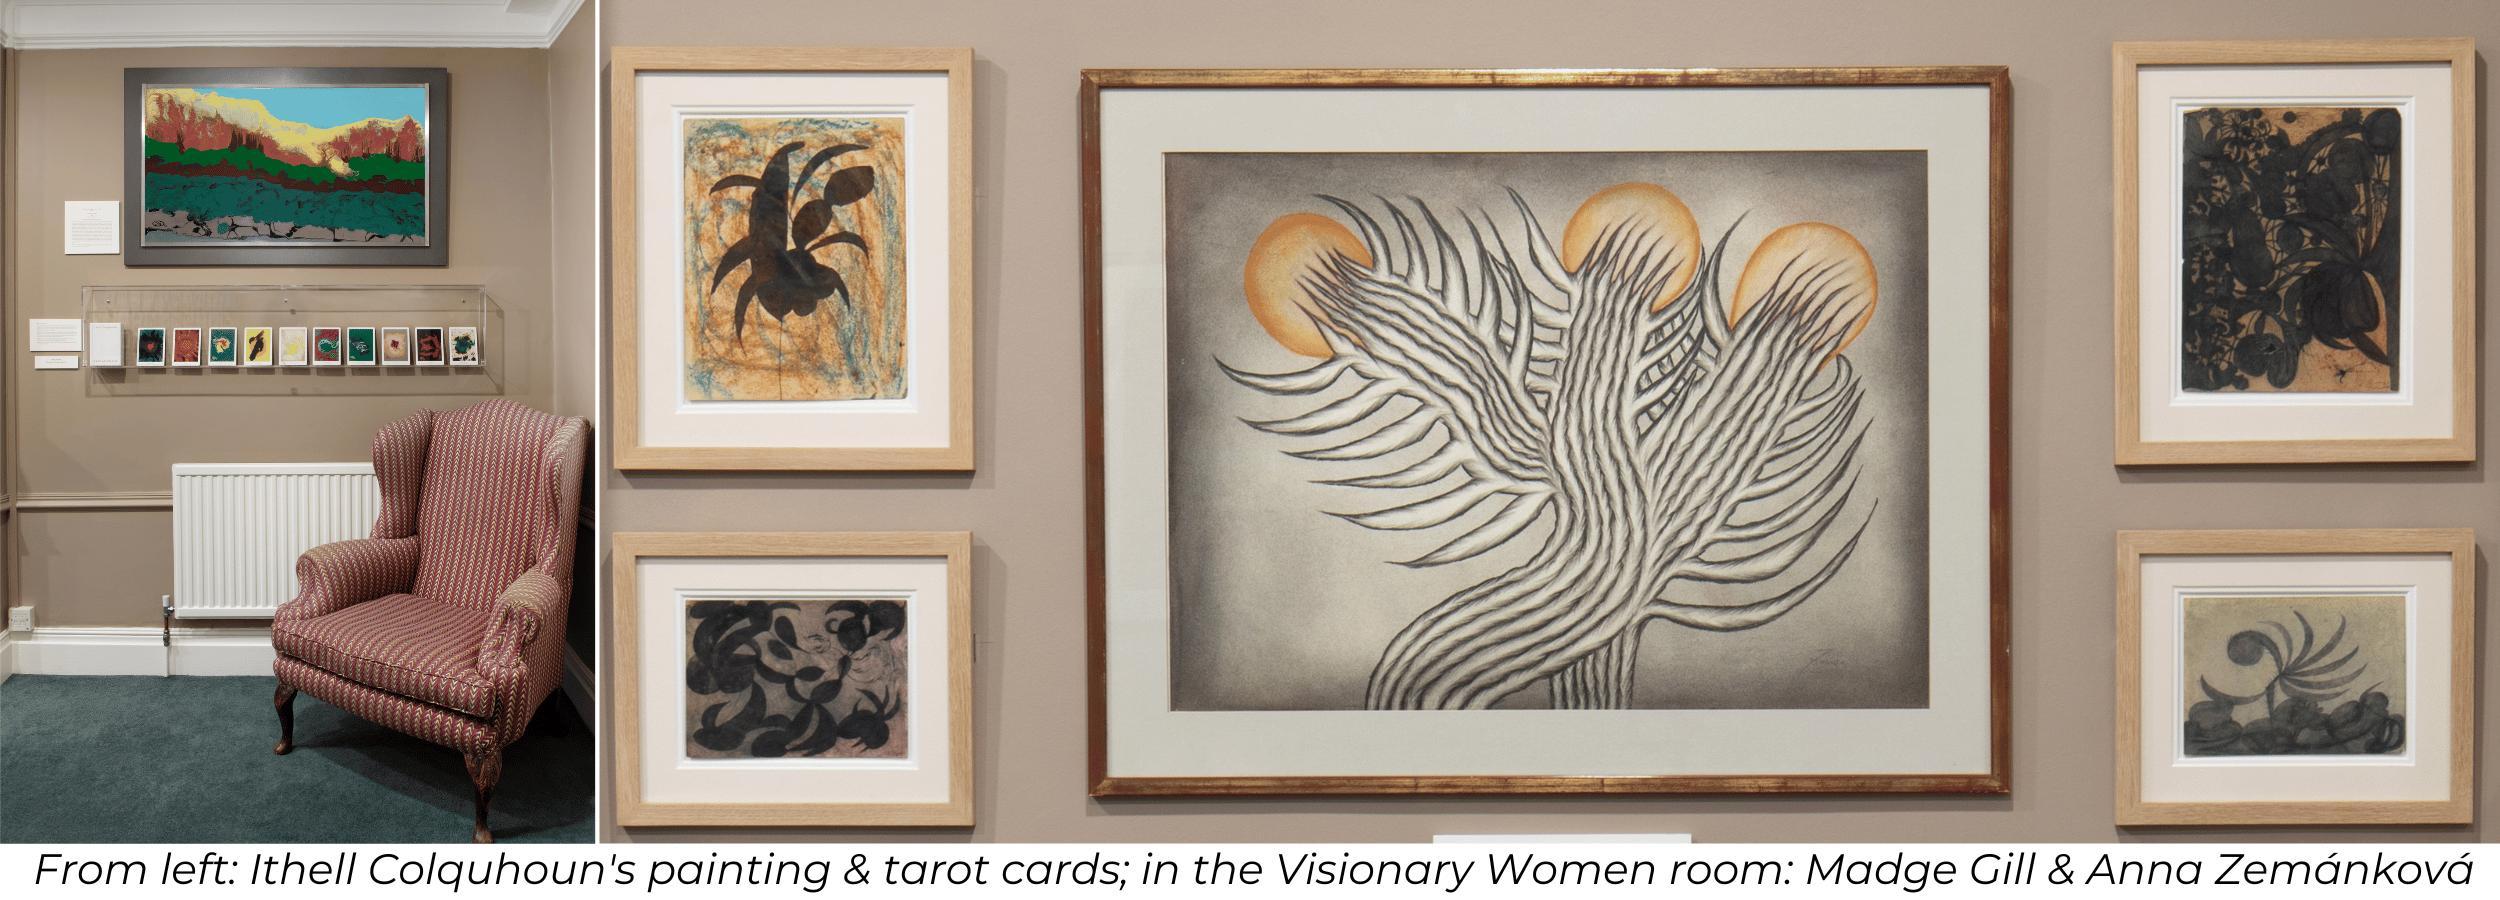 Paintings by Ithell Colquhoun, Madge Gill and Anna Zemankova